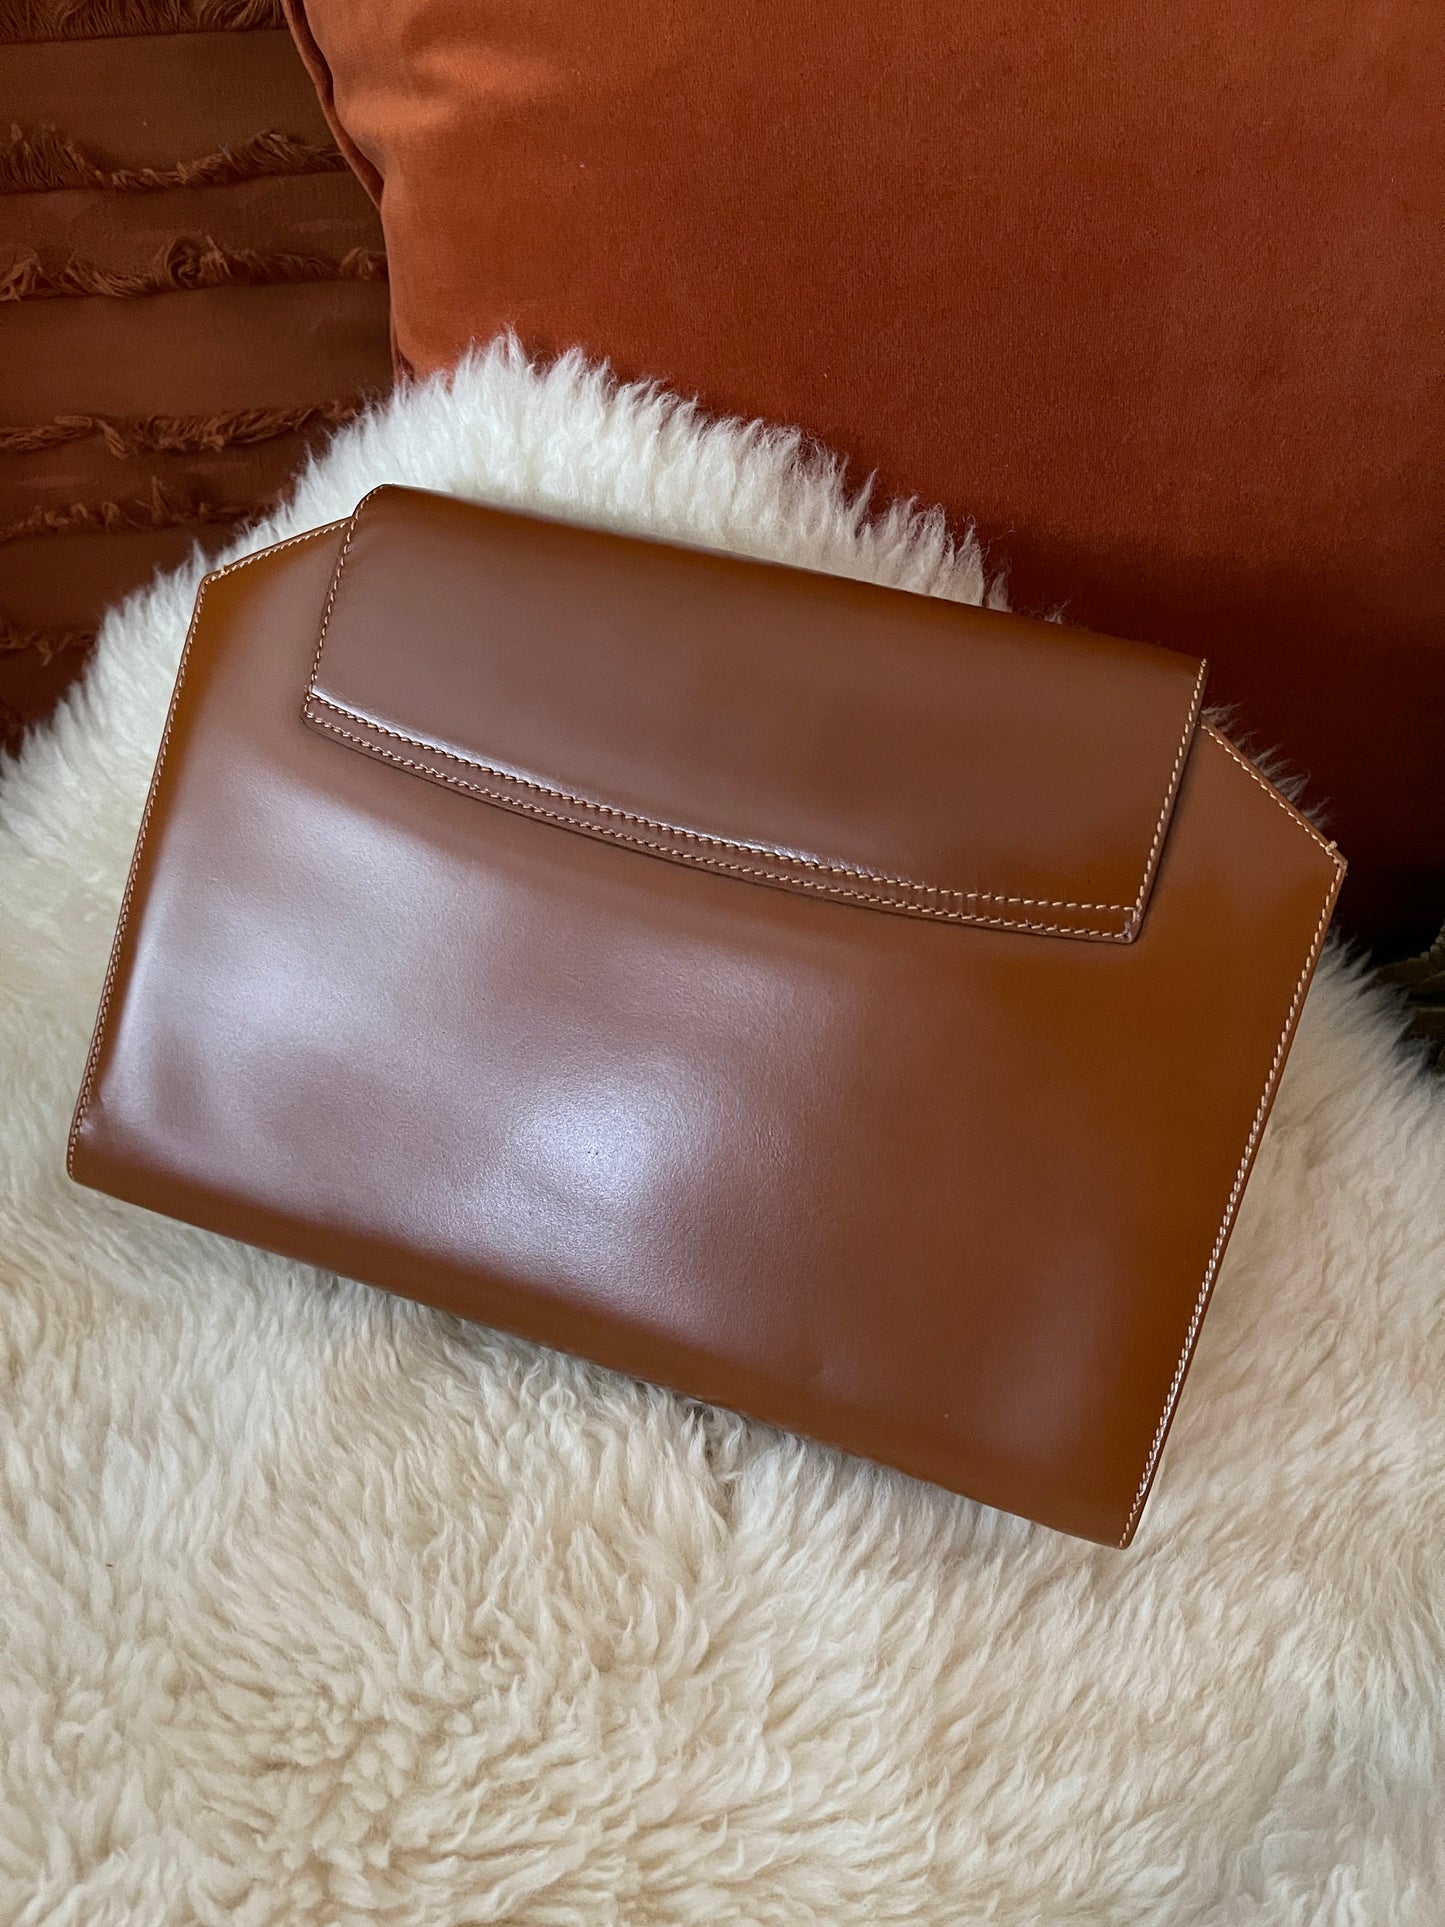 GUCCI VINTAGE 100% Authentic Genuine Glossy Leather Clutch, Caramel Colour, 1980's, Great Condition, Rare